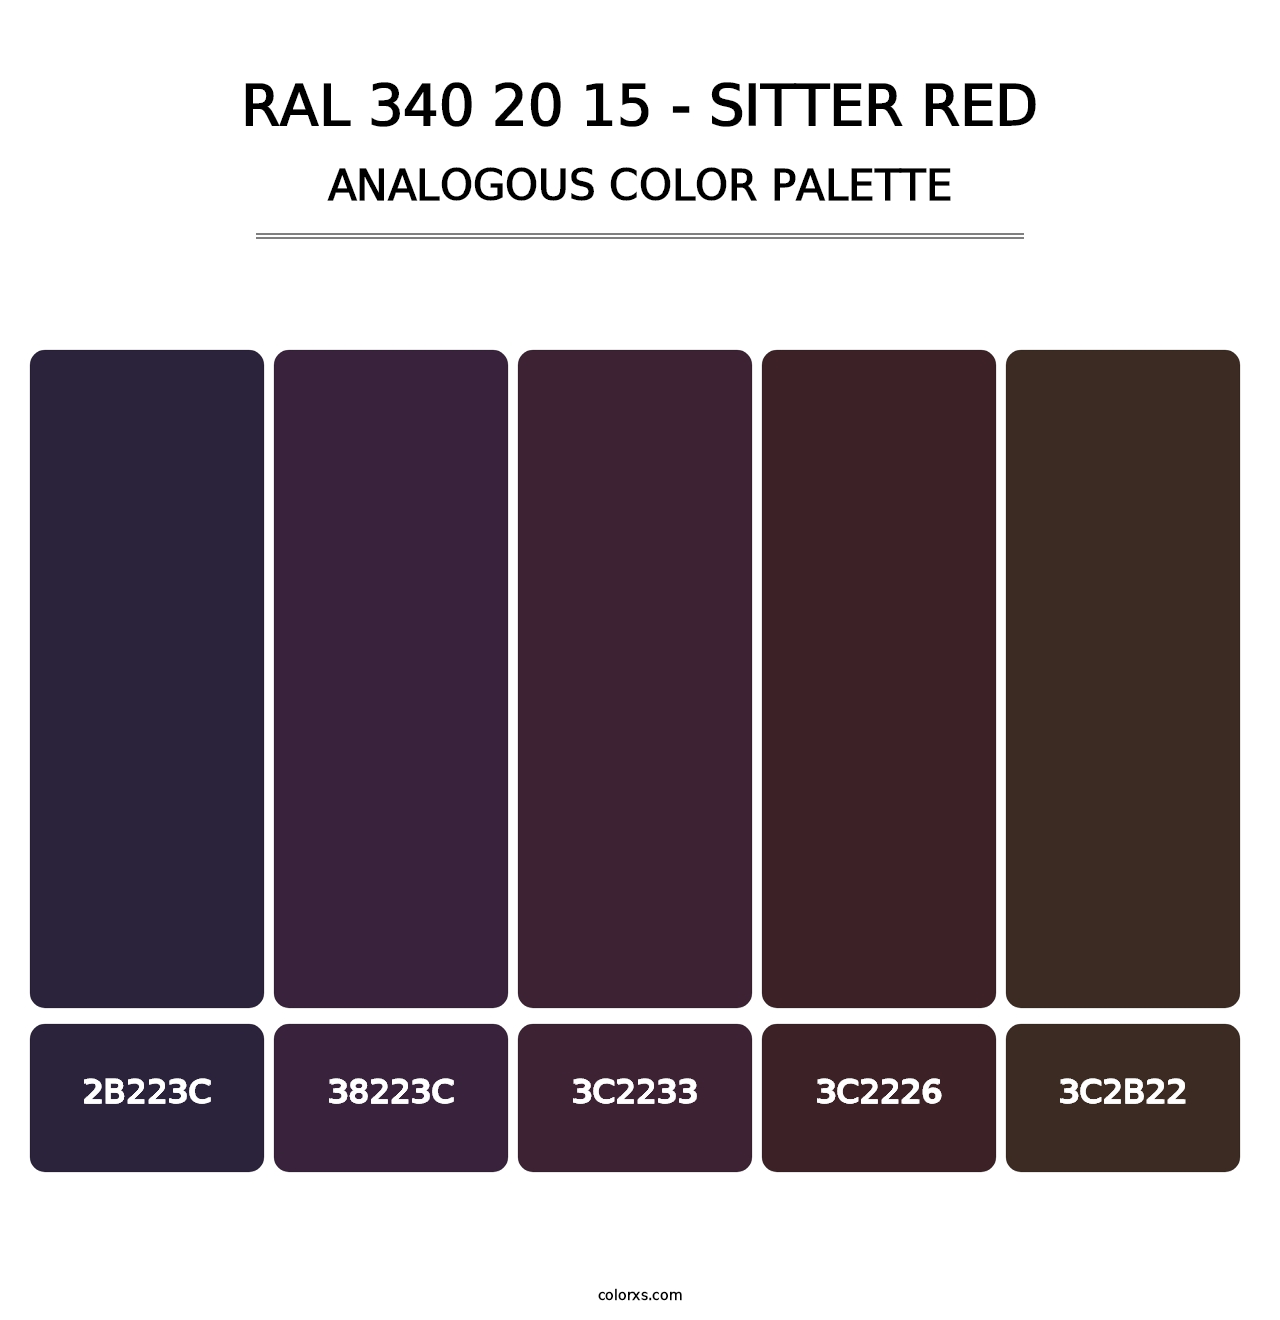 RAL 340 20 15 - Sitter Red - Analogous Color Palette